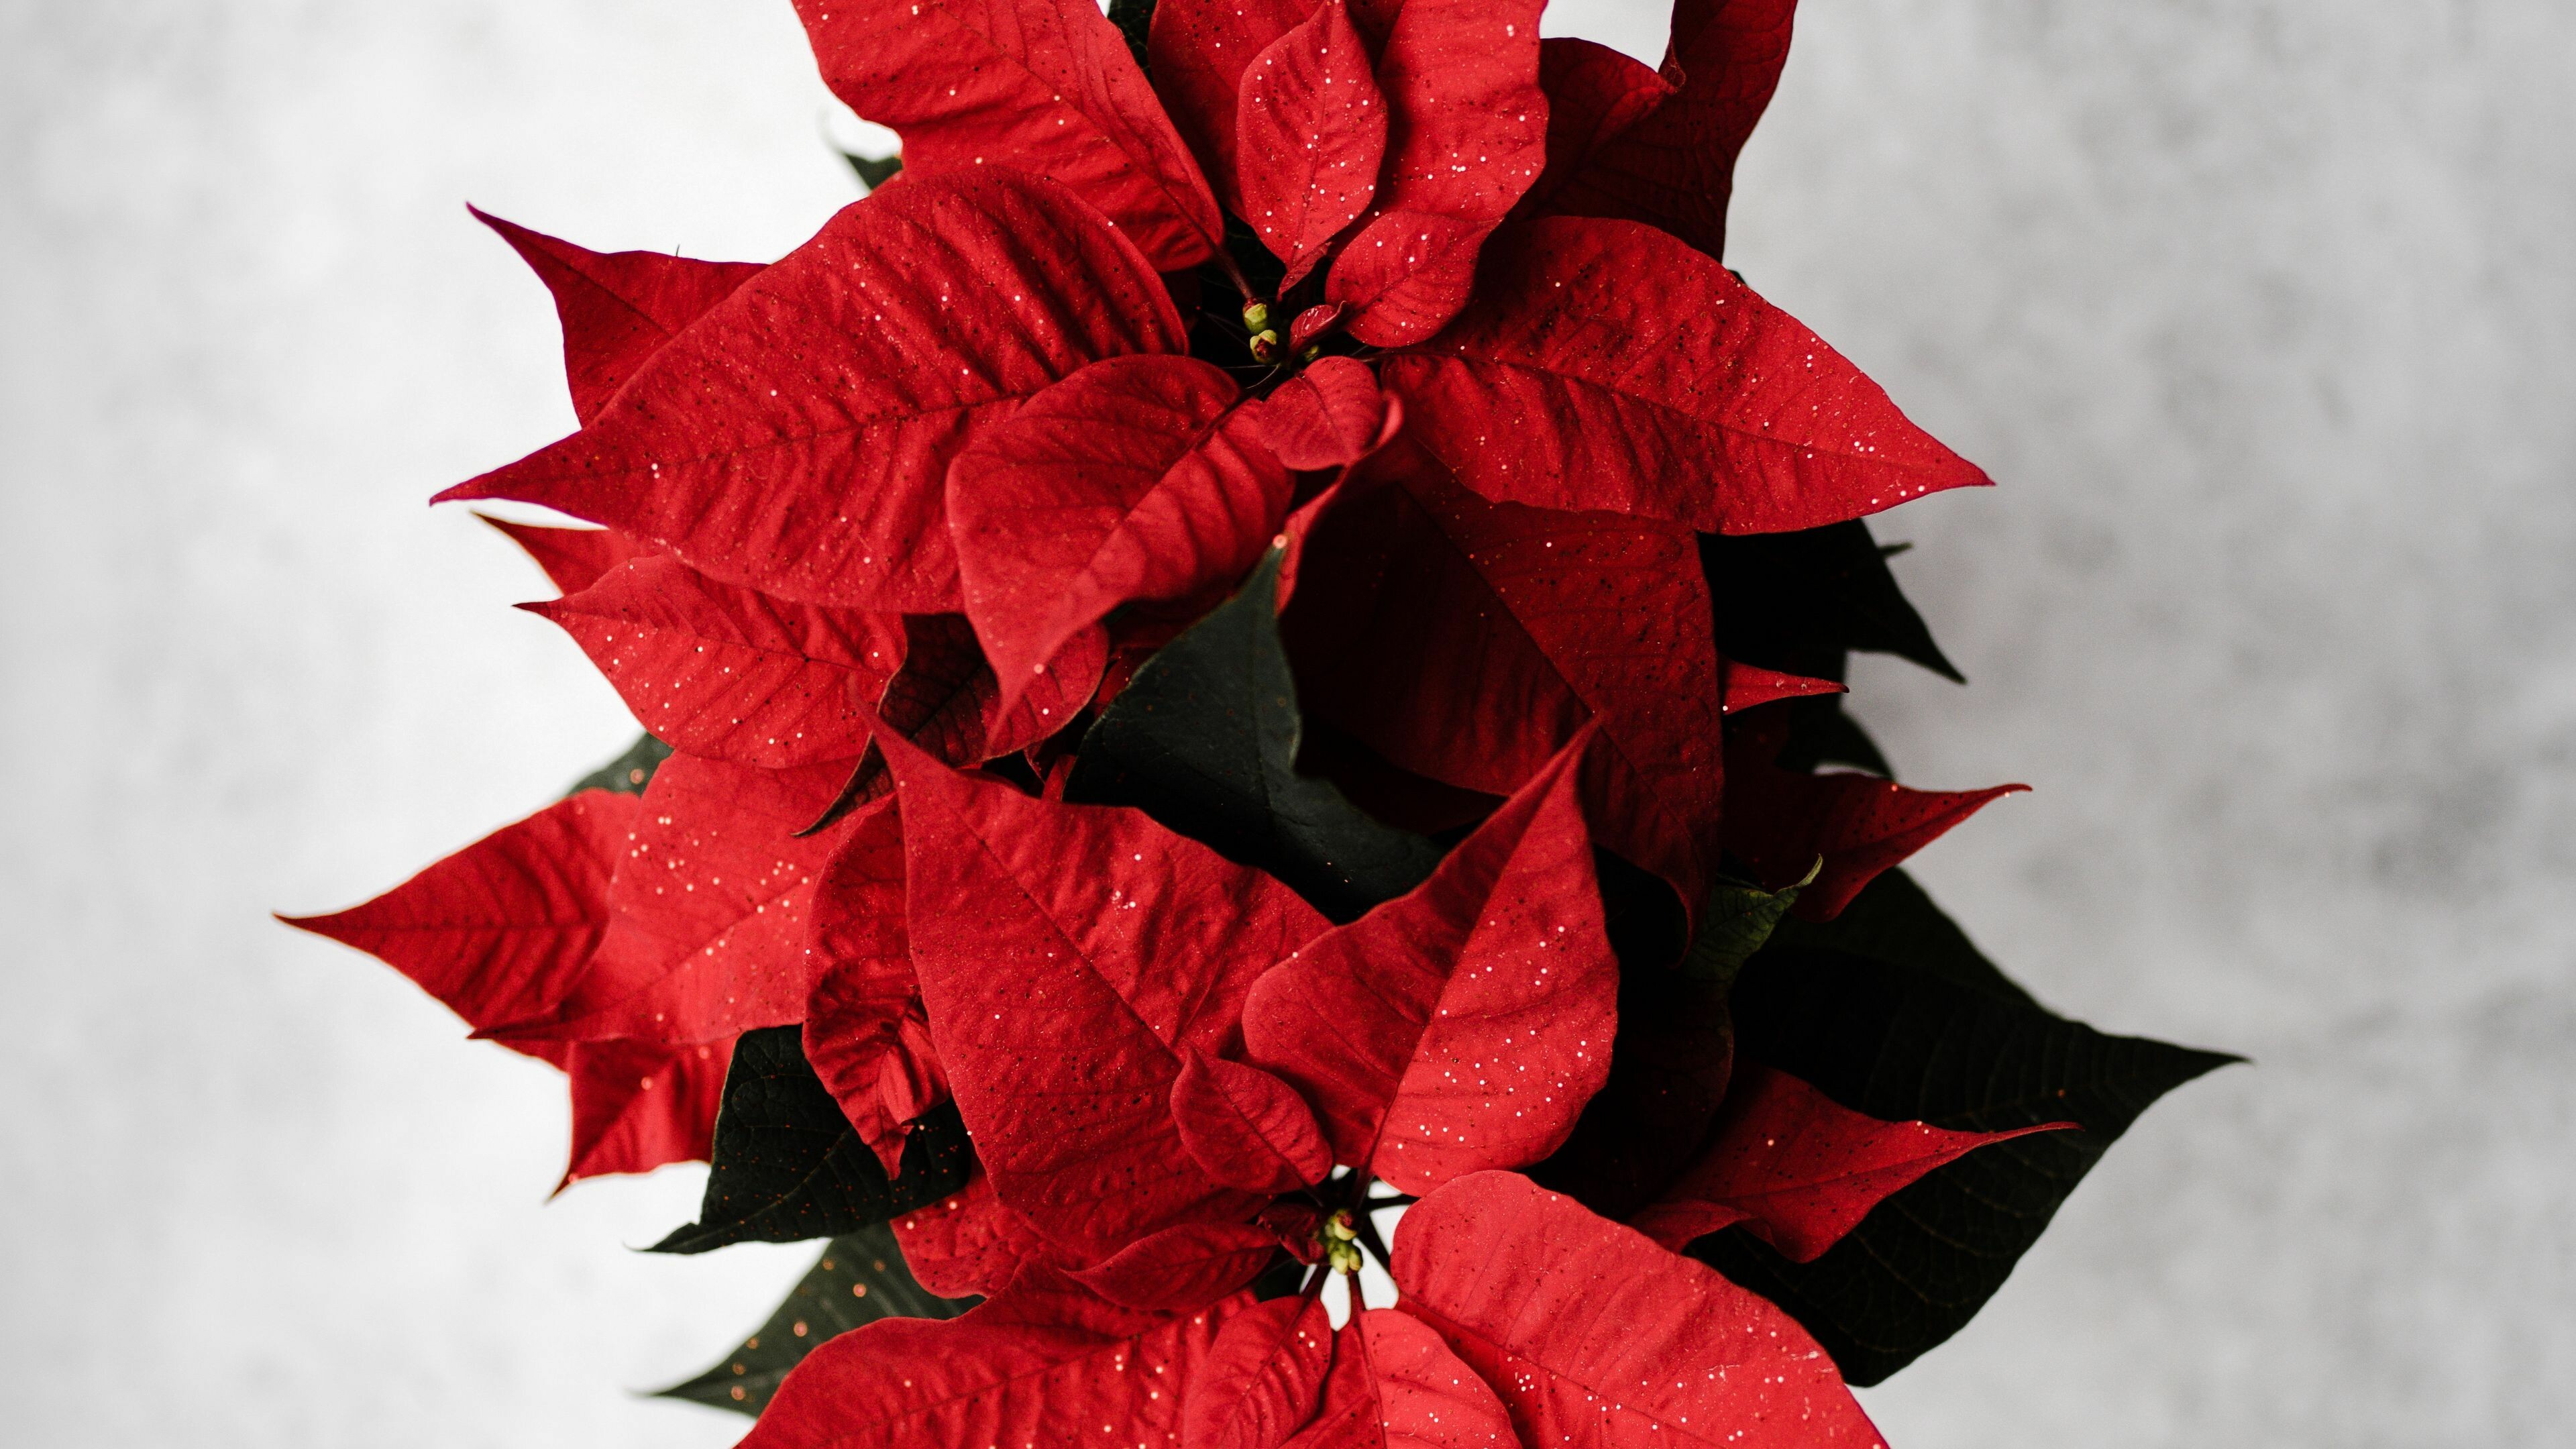 Red abstract, Poinsettia leaves, Vibrant flower, Nature's painting, 3840x2160 4K Desktop